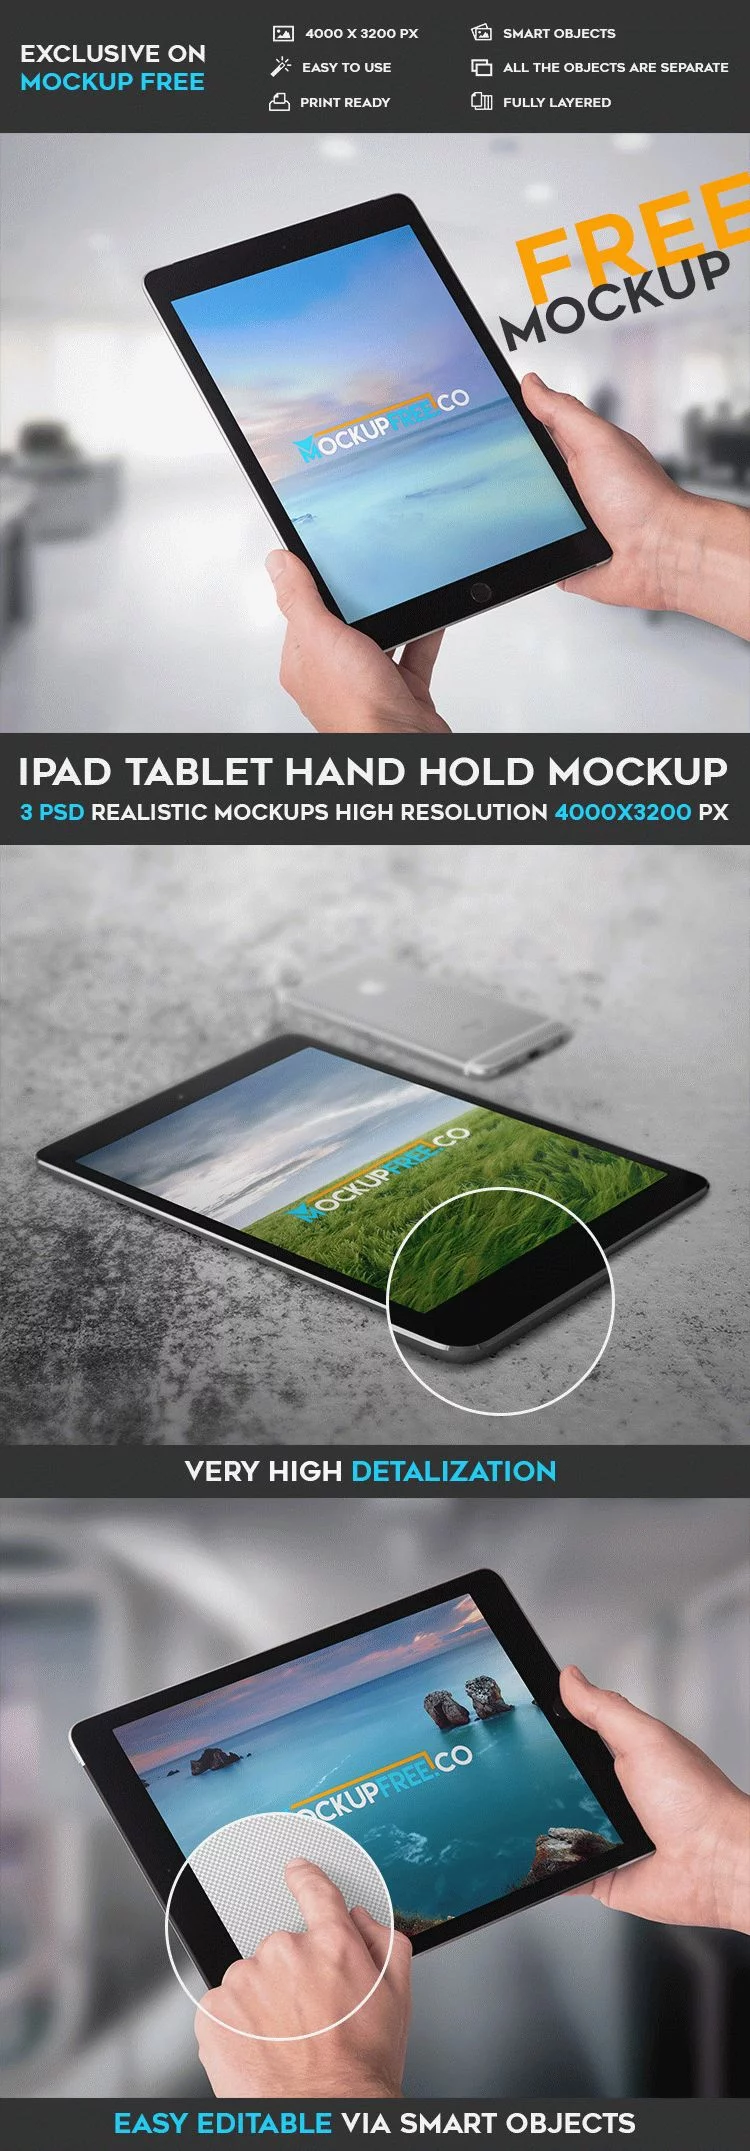 bigpreview_ipad-tablet-hand-hold-free-psd-mockup